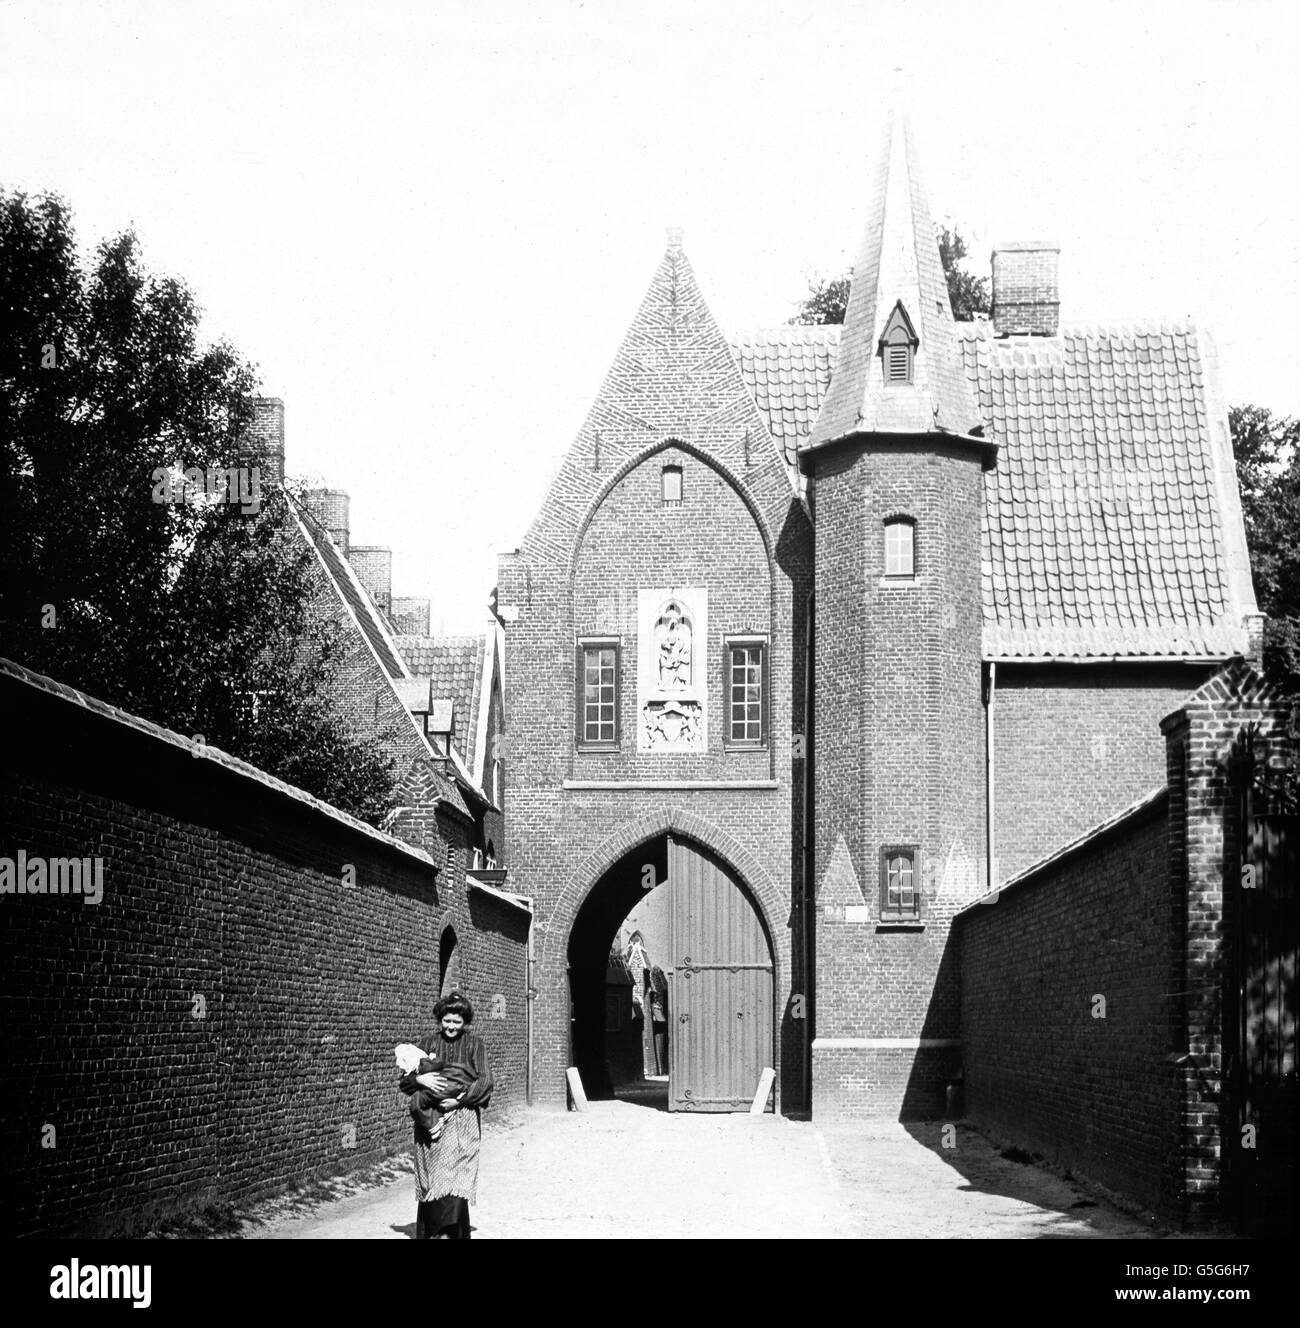 Gent, Eingang zum Beginenhof. The entrance to the Beguine quarter at Ghent in Belgium. Europe, Belgium, travel, history, historical, 1910s, 1920s, 20th century, archive, Carl Simon, entrance, court, nuns, religion, belief, black and white, women, baby, glass slide Stock Photo